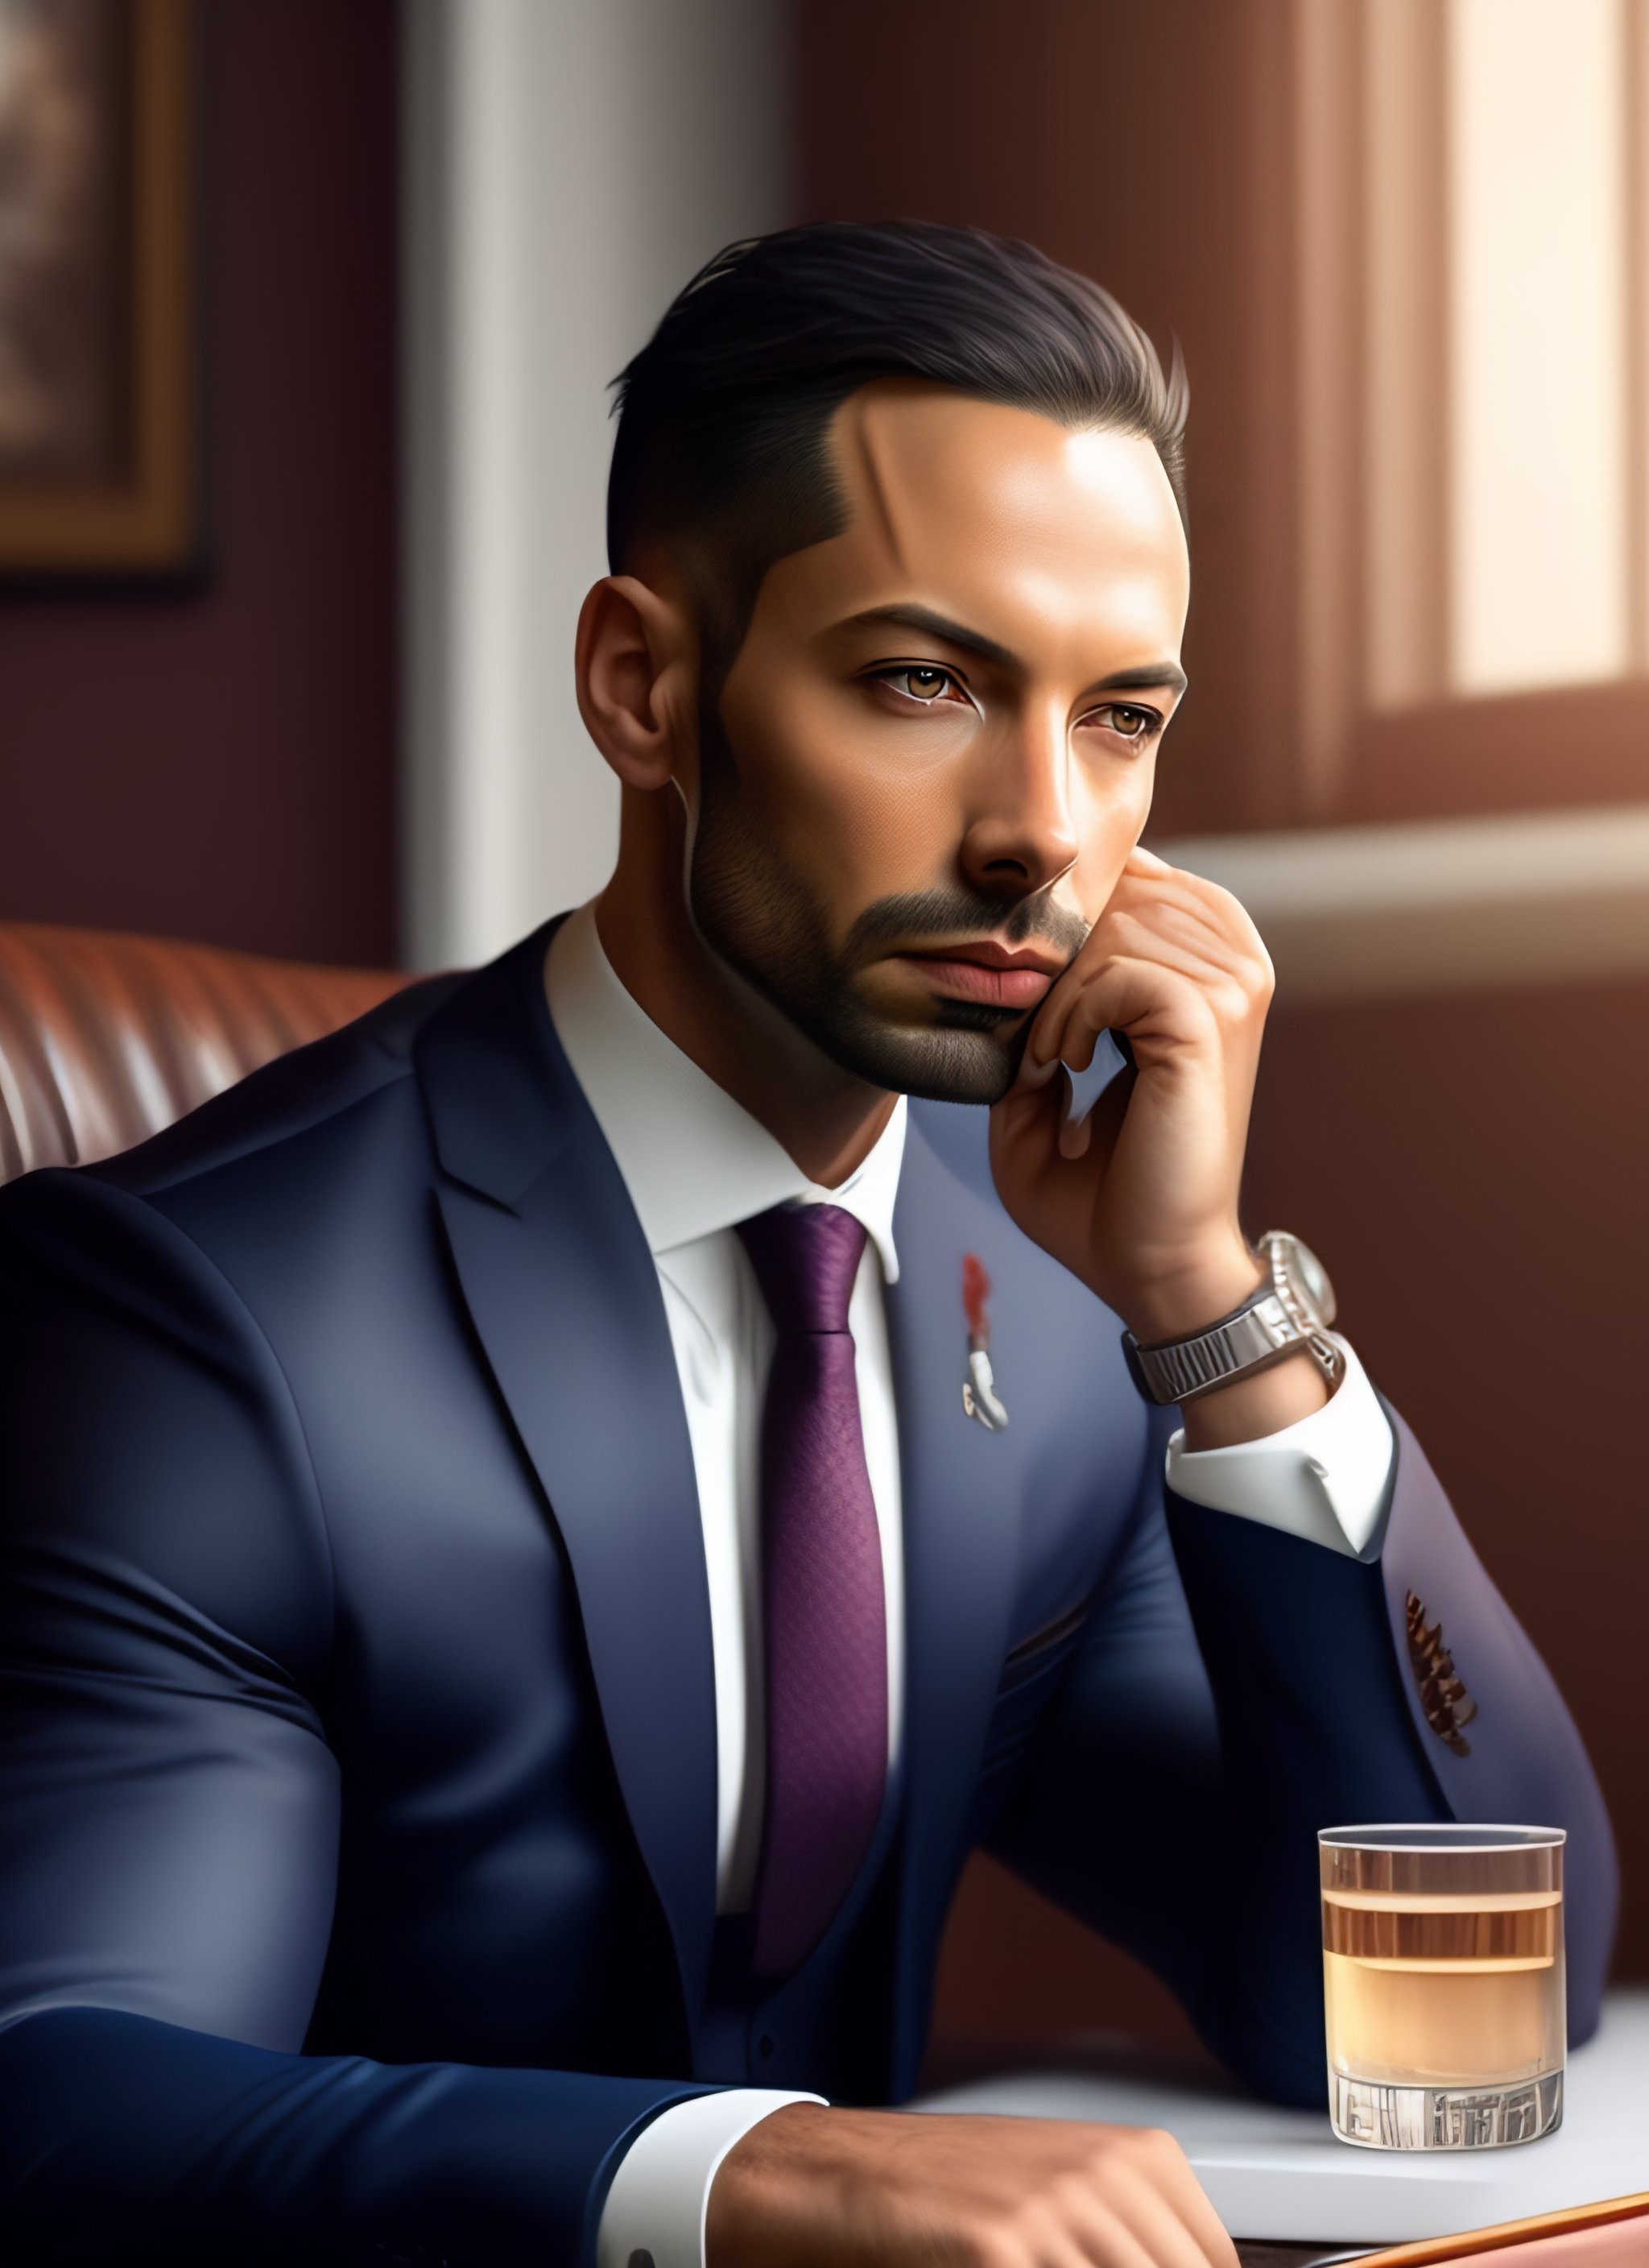 Lexica - A highly detailed illustration of Andrew Tate wearing a suit ...